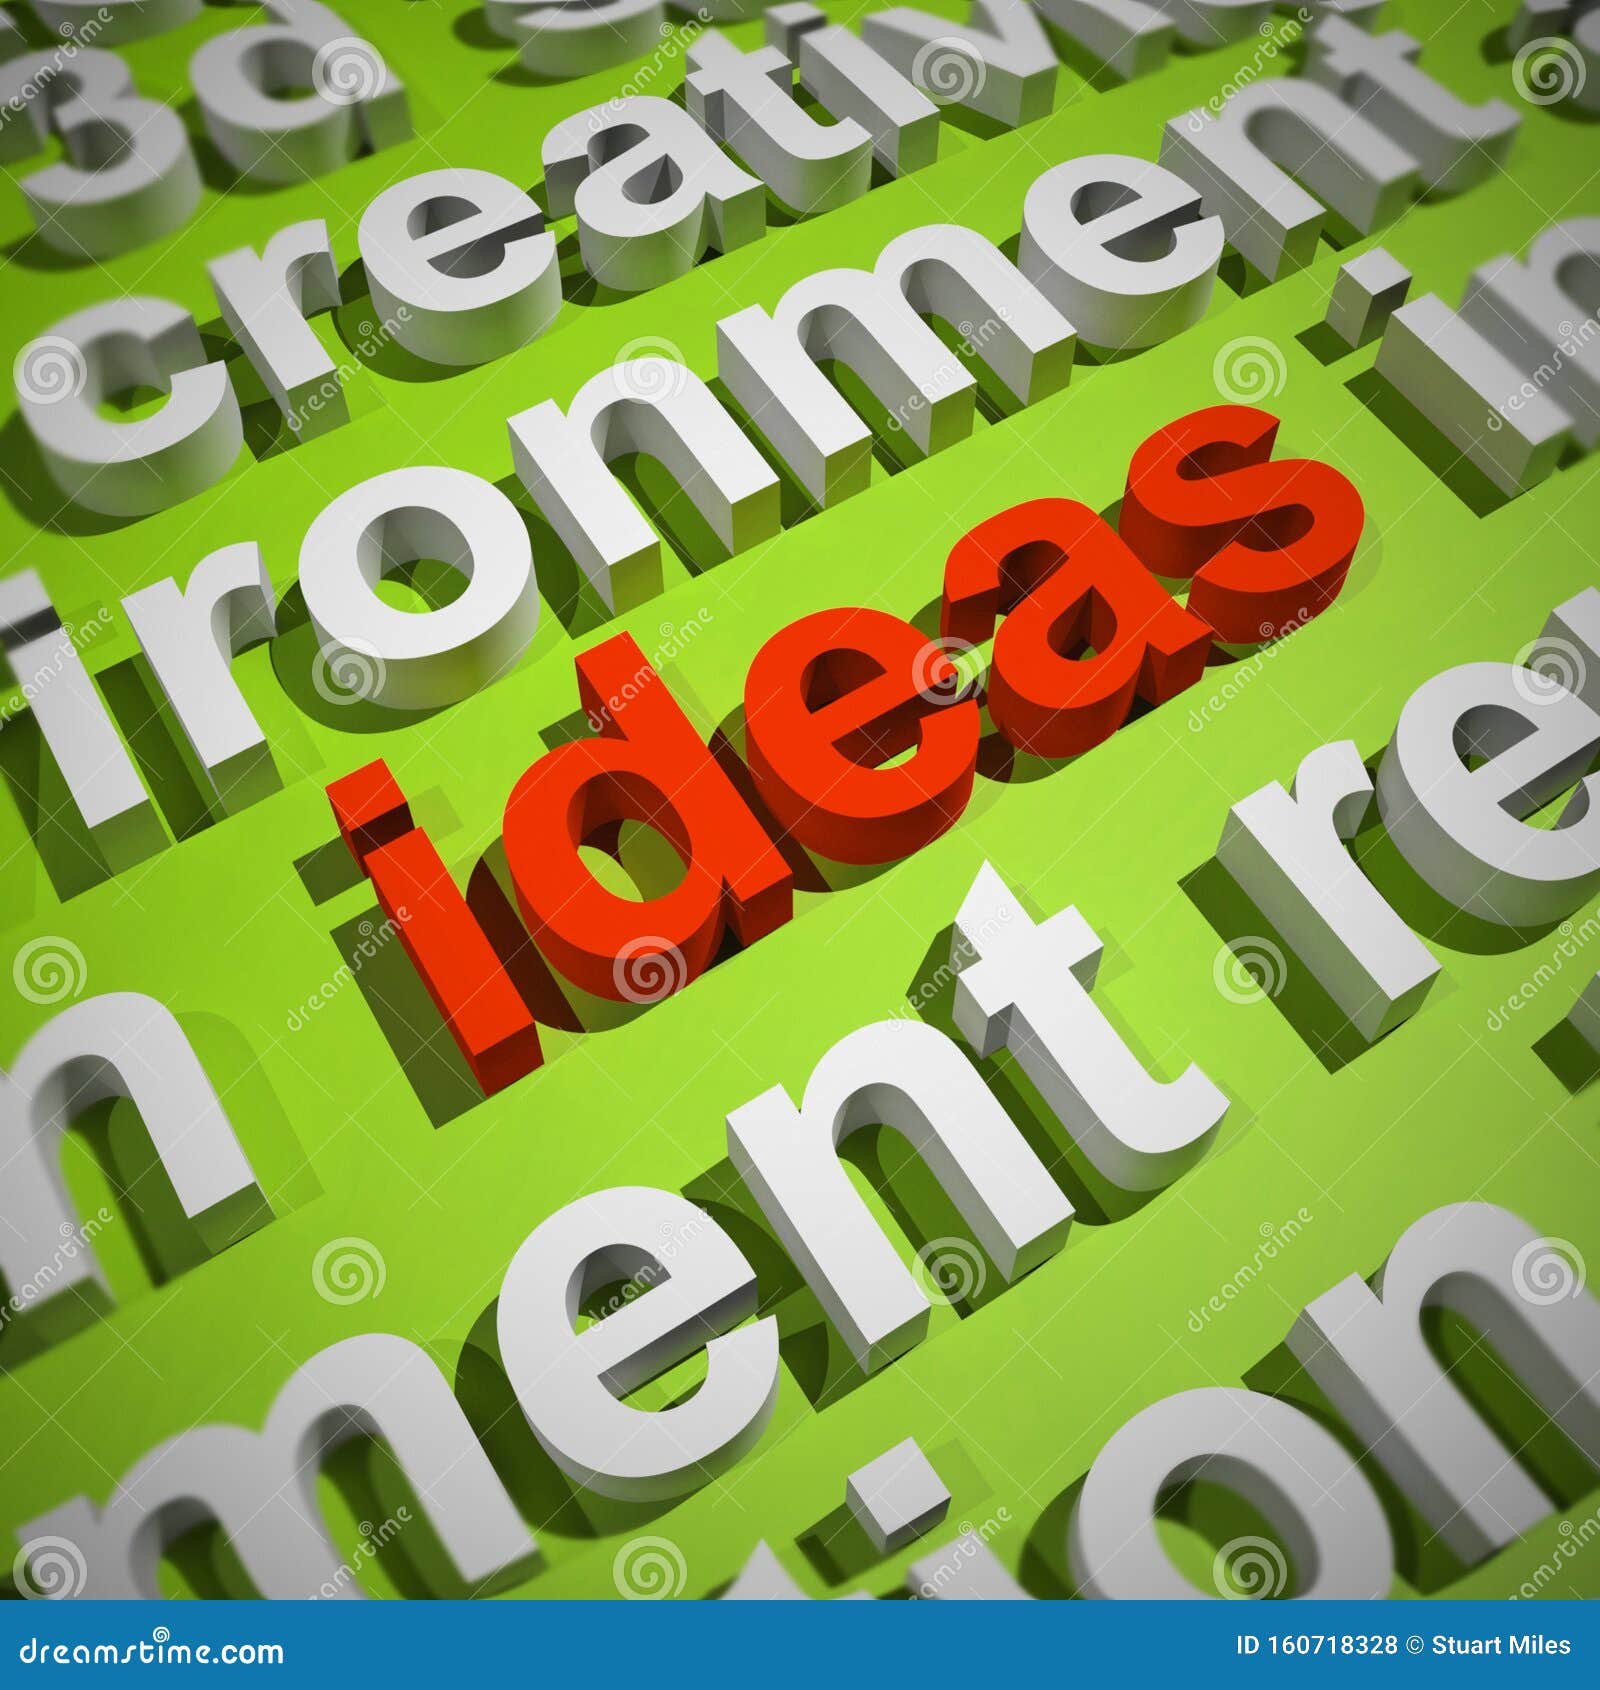 ideas  icon means brainwave or brilliant thoughts and plan - 3d 